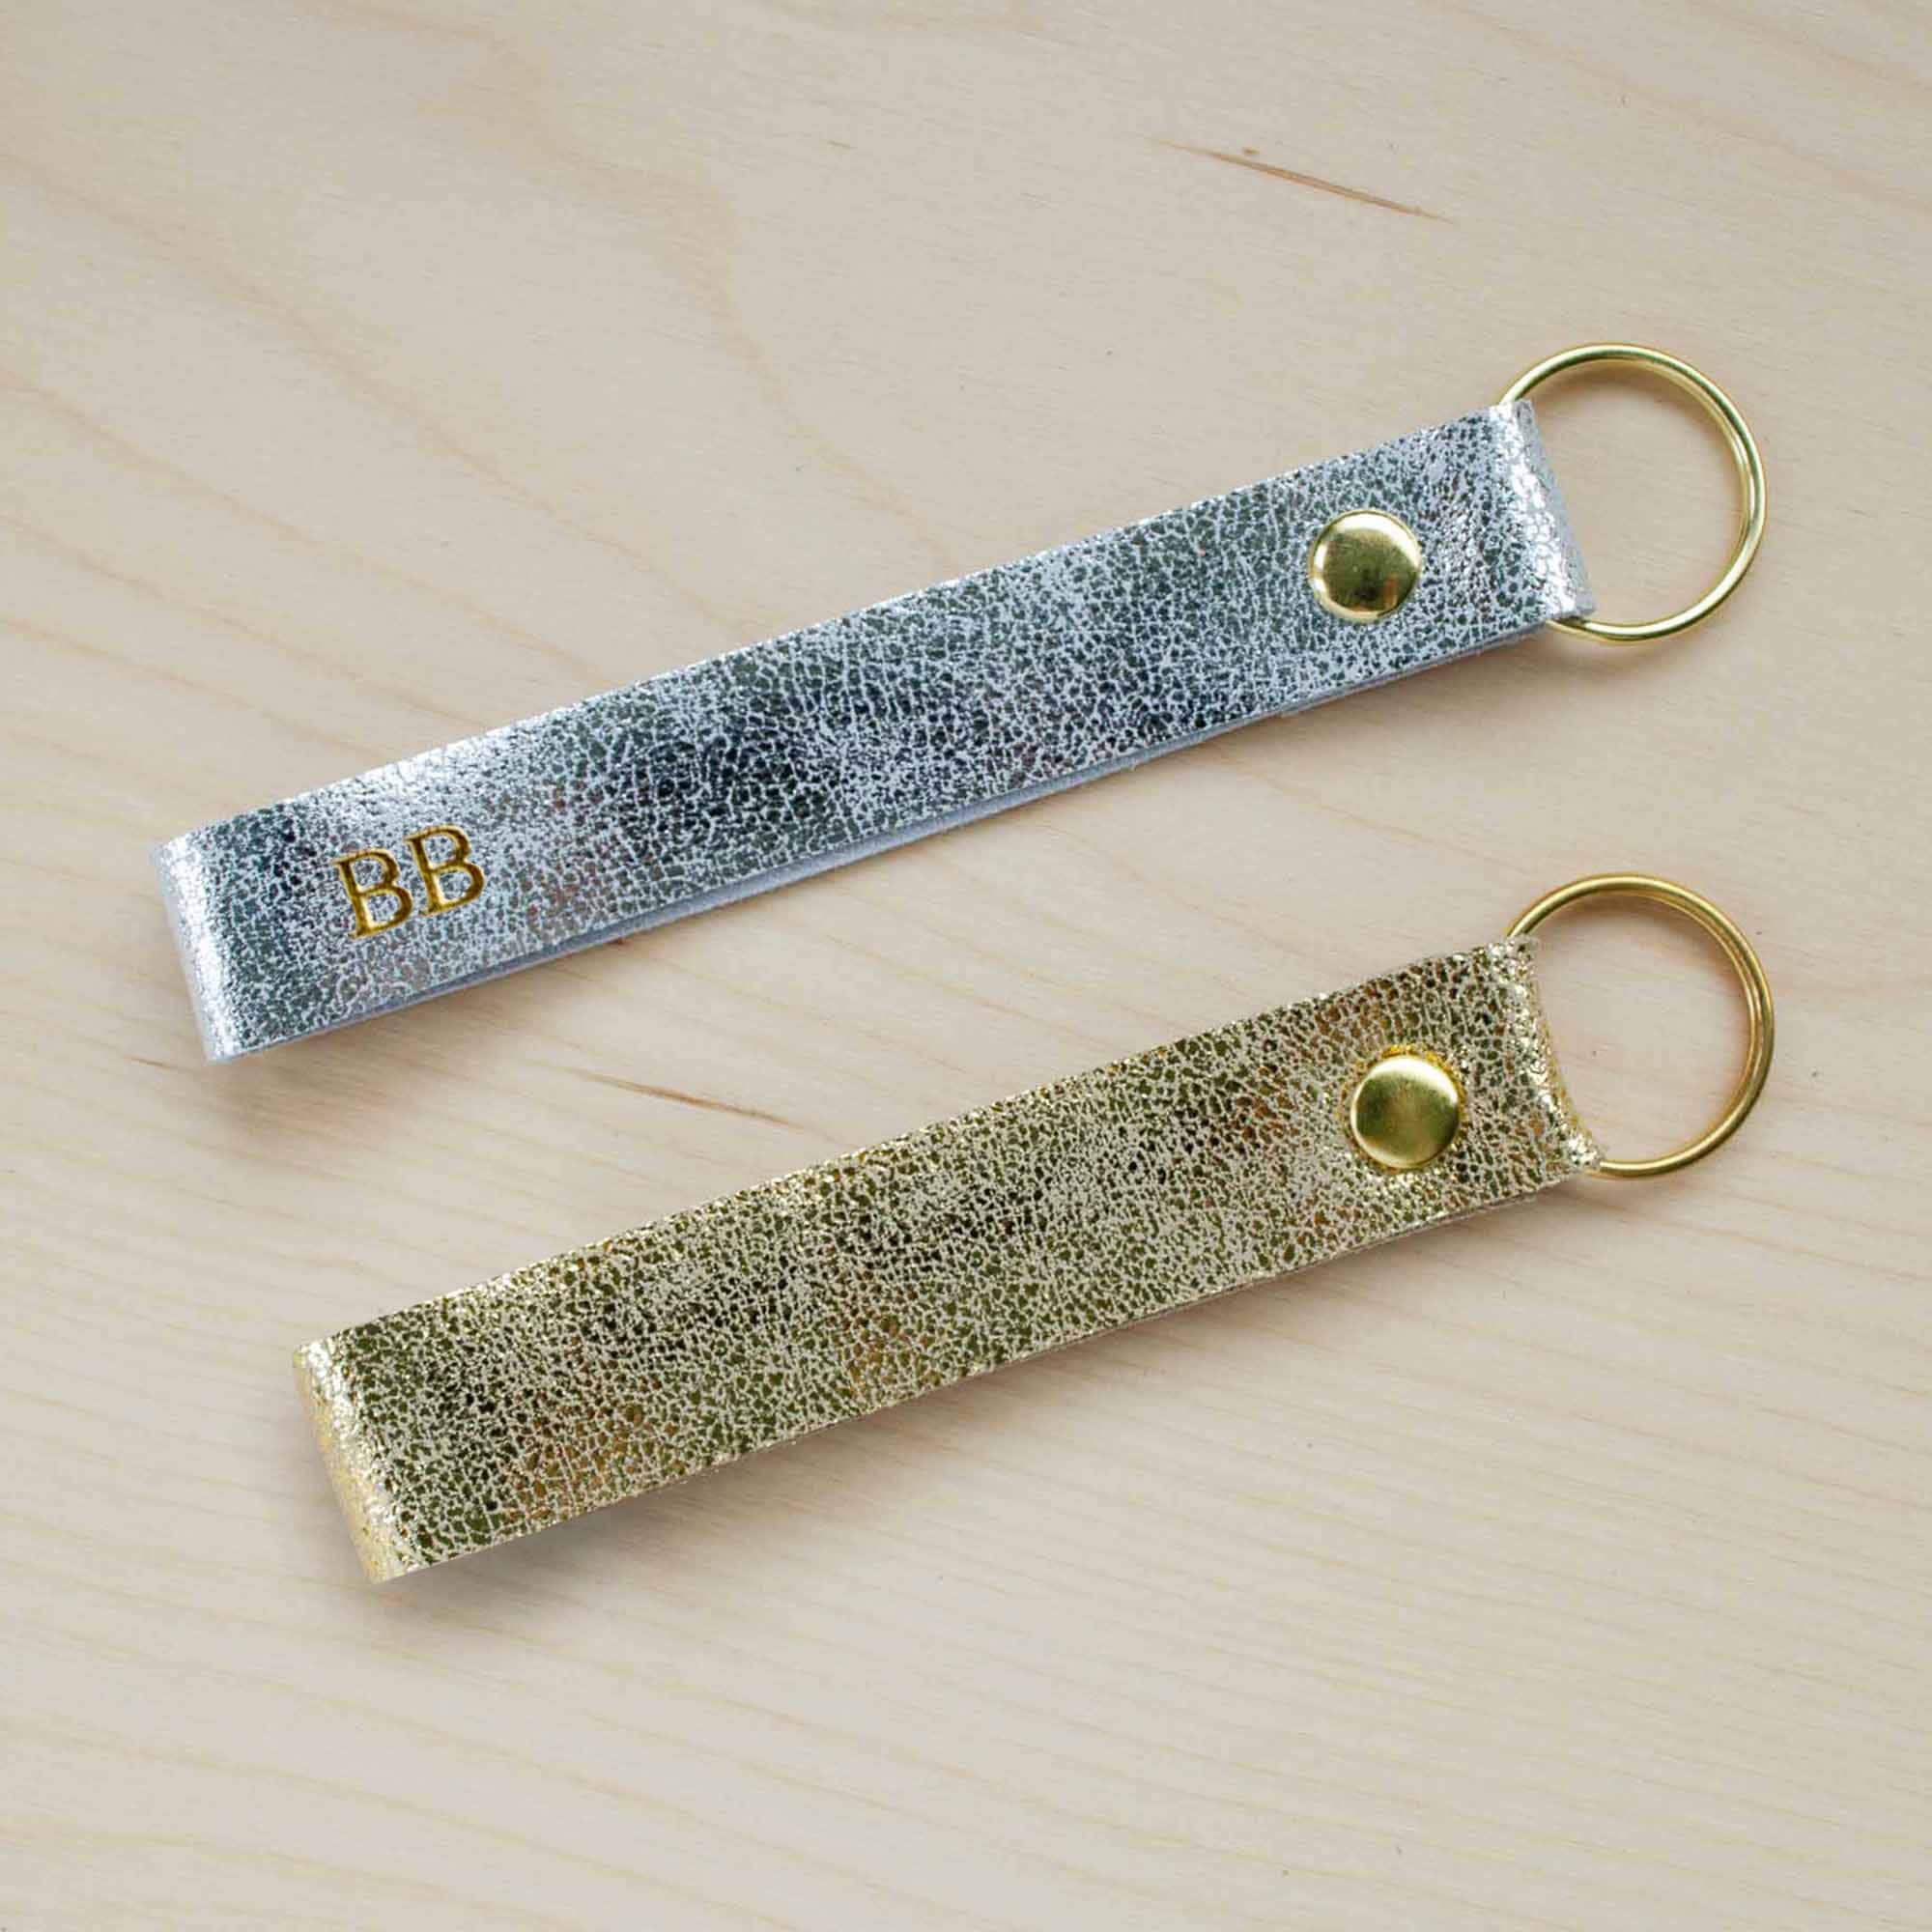 Silver & Gold Leather Looped Keyring, Personalised Key Ring. Birthday Presents